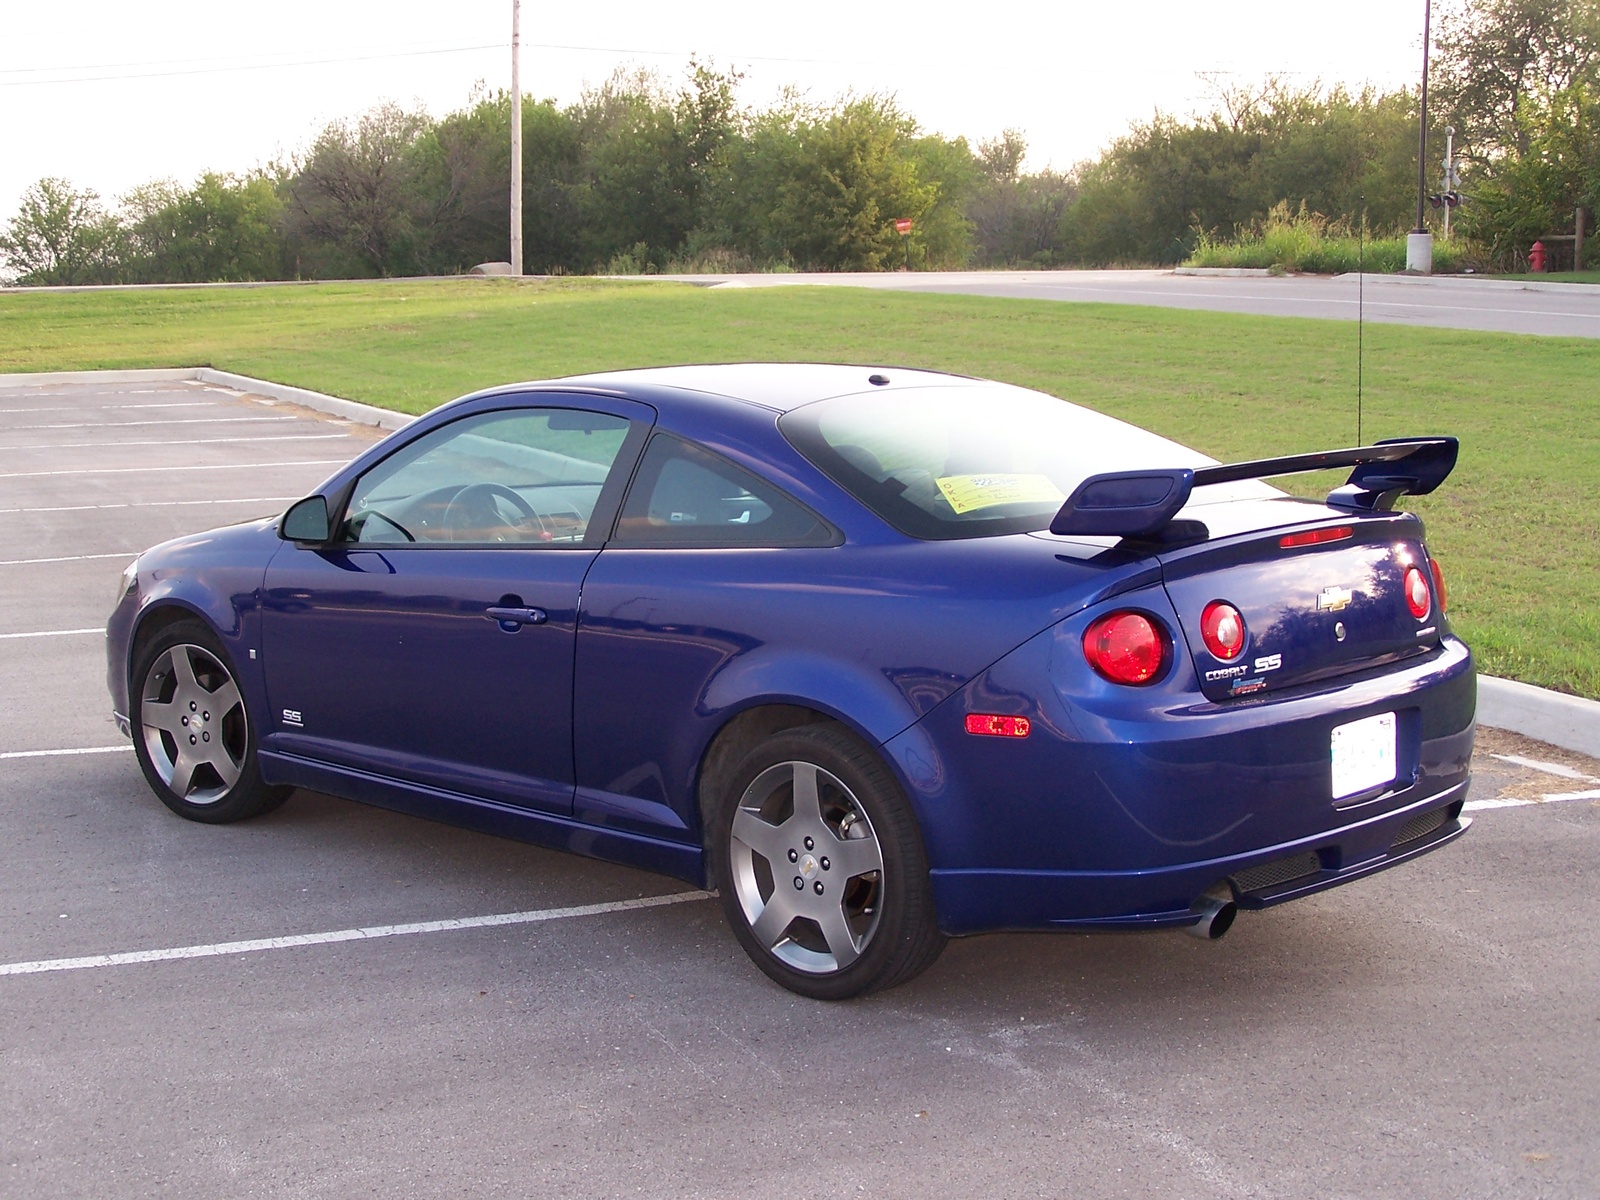 Chevrolet Cobalt Ss 2006 822 Auto Car Wallpapers, 1600x1200 in 680.1KB. 